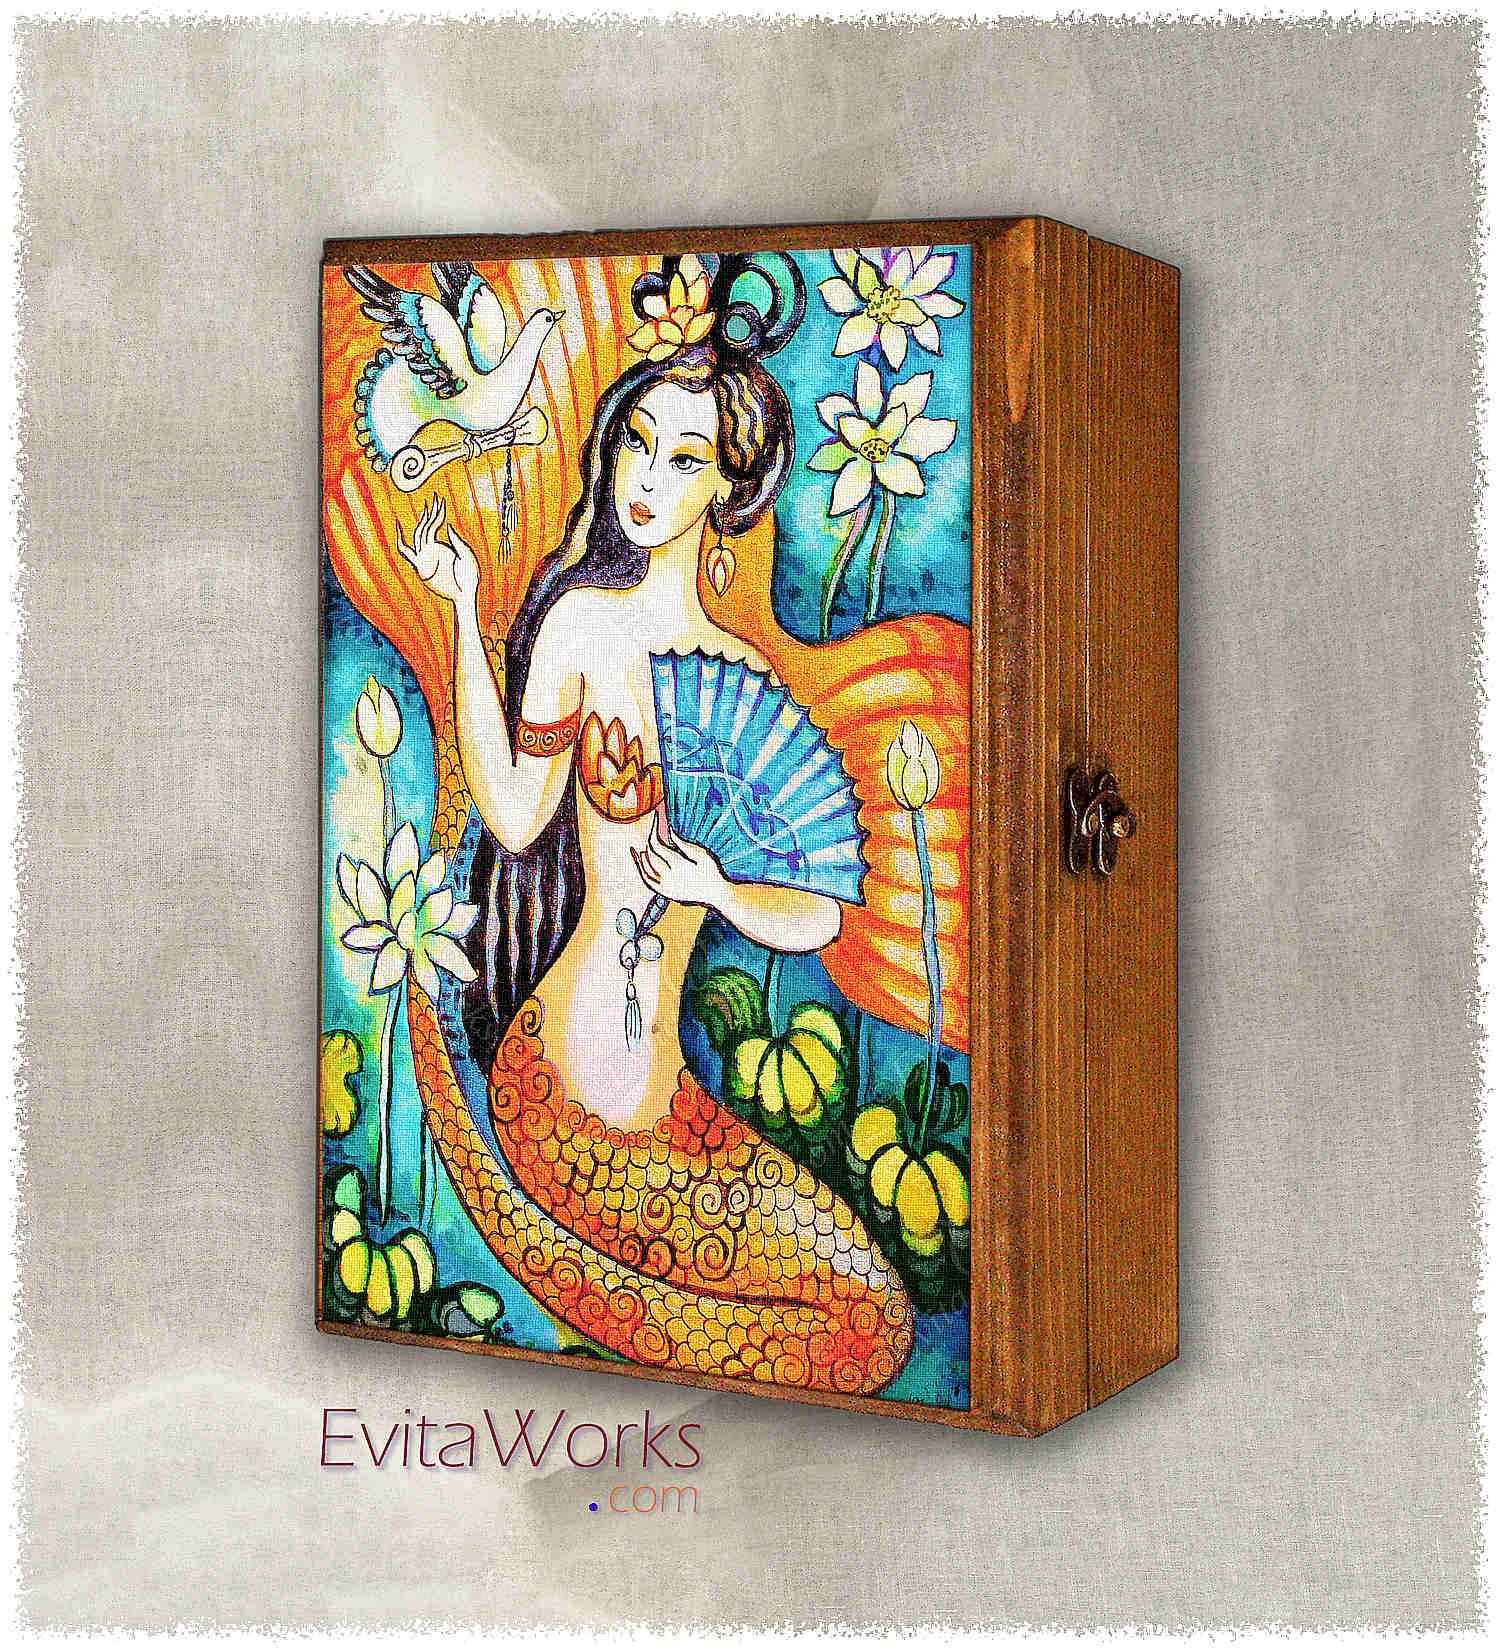 Hit to learn about "A Letter from Far Away, Asian mermaid" on jewelboxes